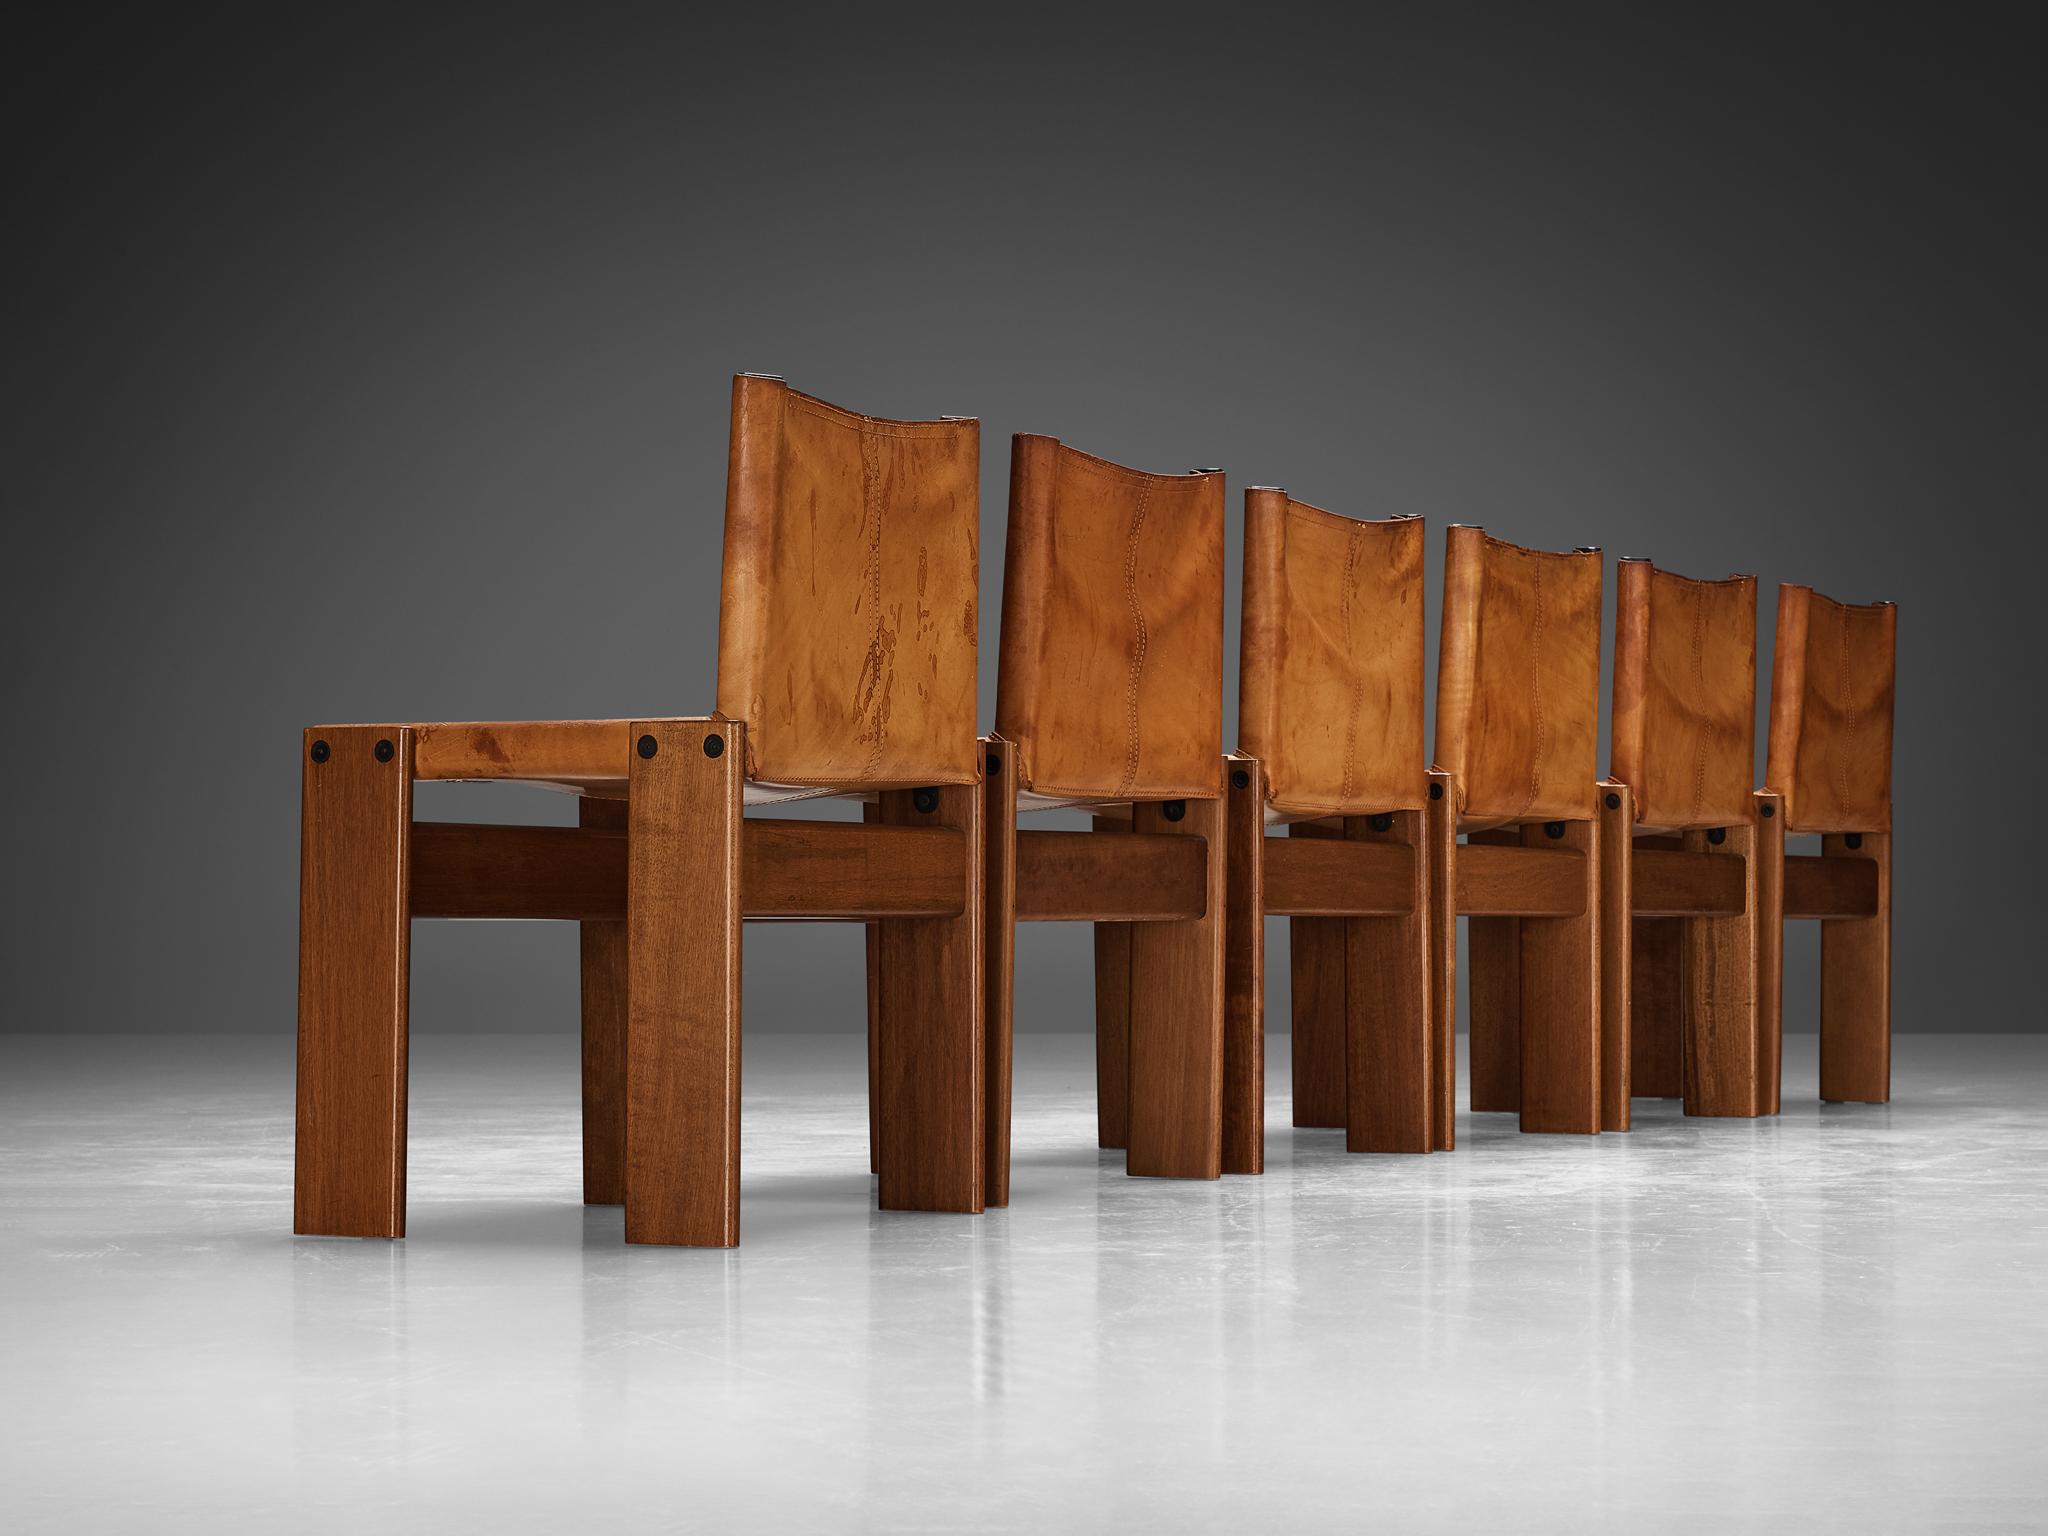 Afra & Tobia Scarpa for Molteni, set of six 'Monk' dining chairs, walnut, leather, Italy, 1974.

Set of six 'Monk' chairs by Italian designers Afra & Tobia Scarpa. The cognac leather forms a striking combination with the walnut wood. Interesting is